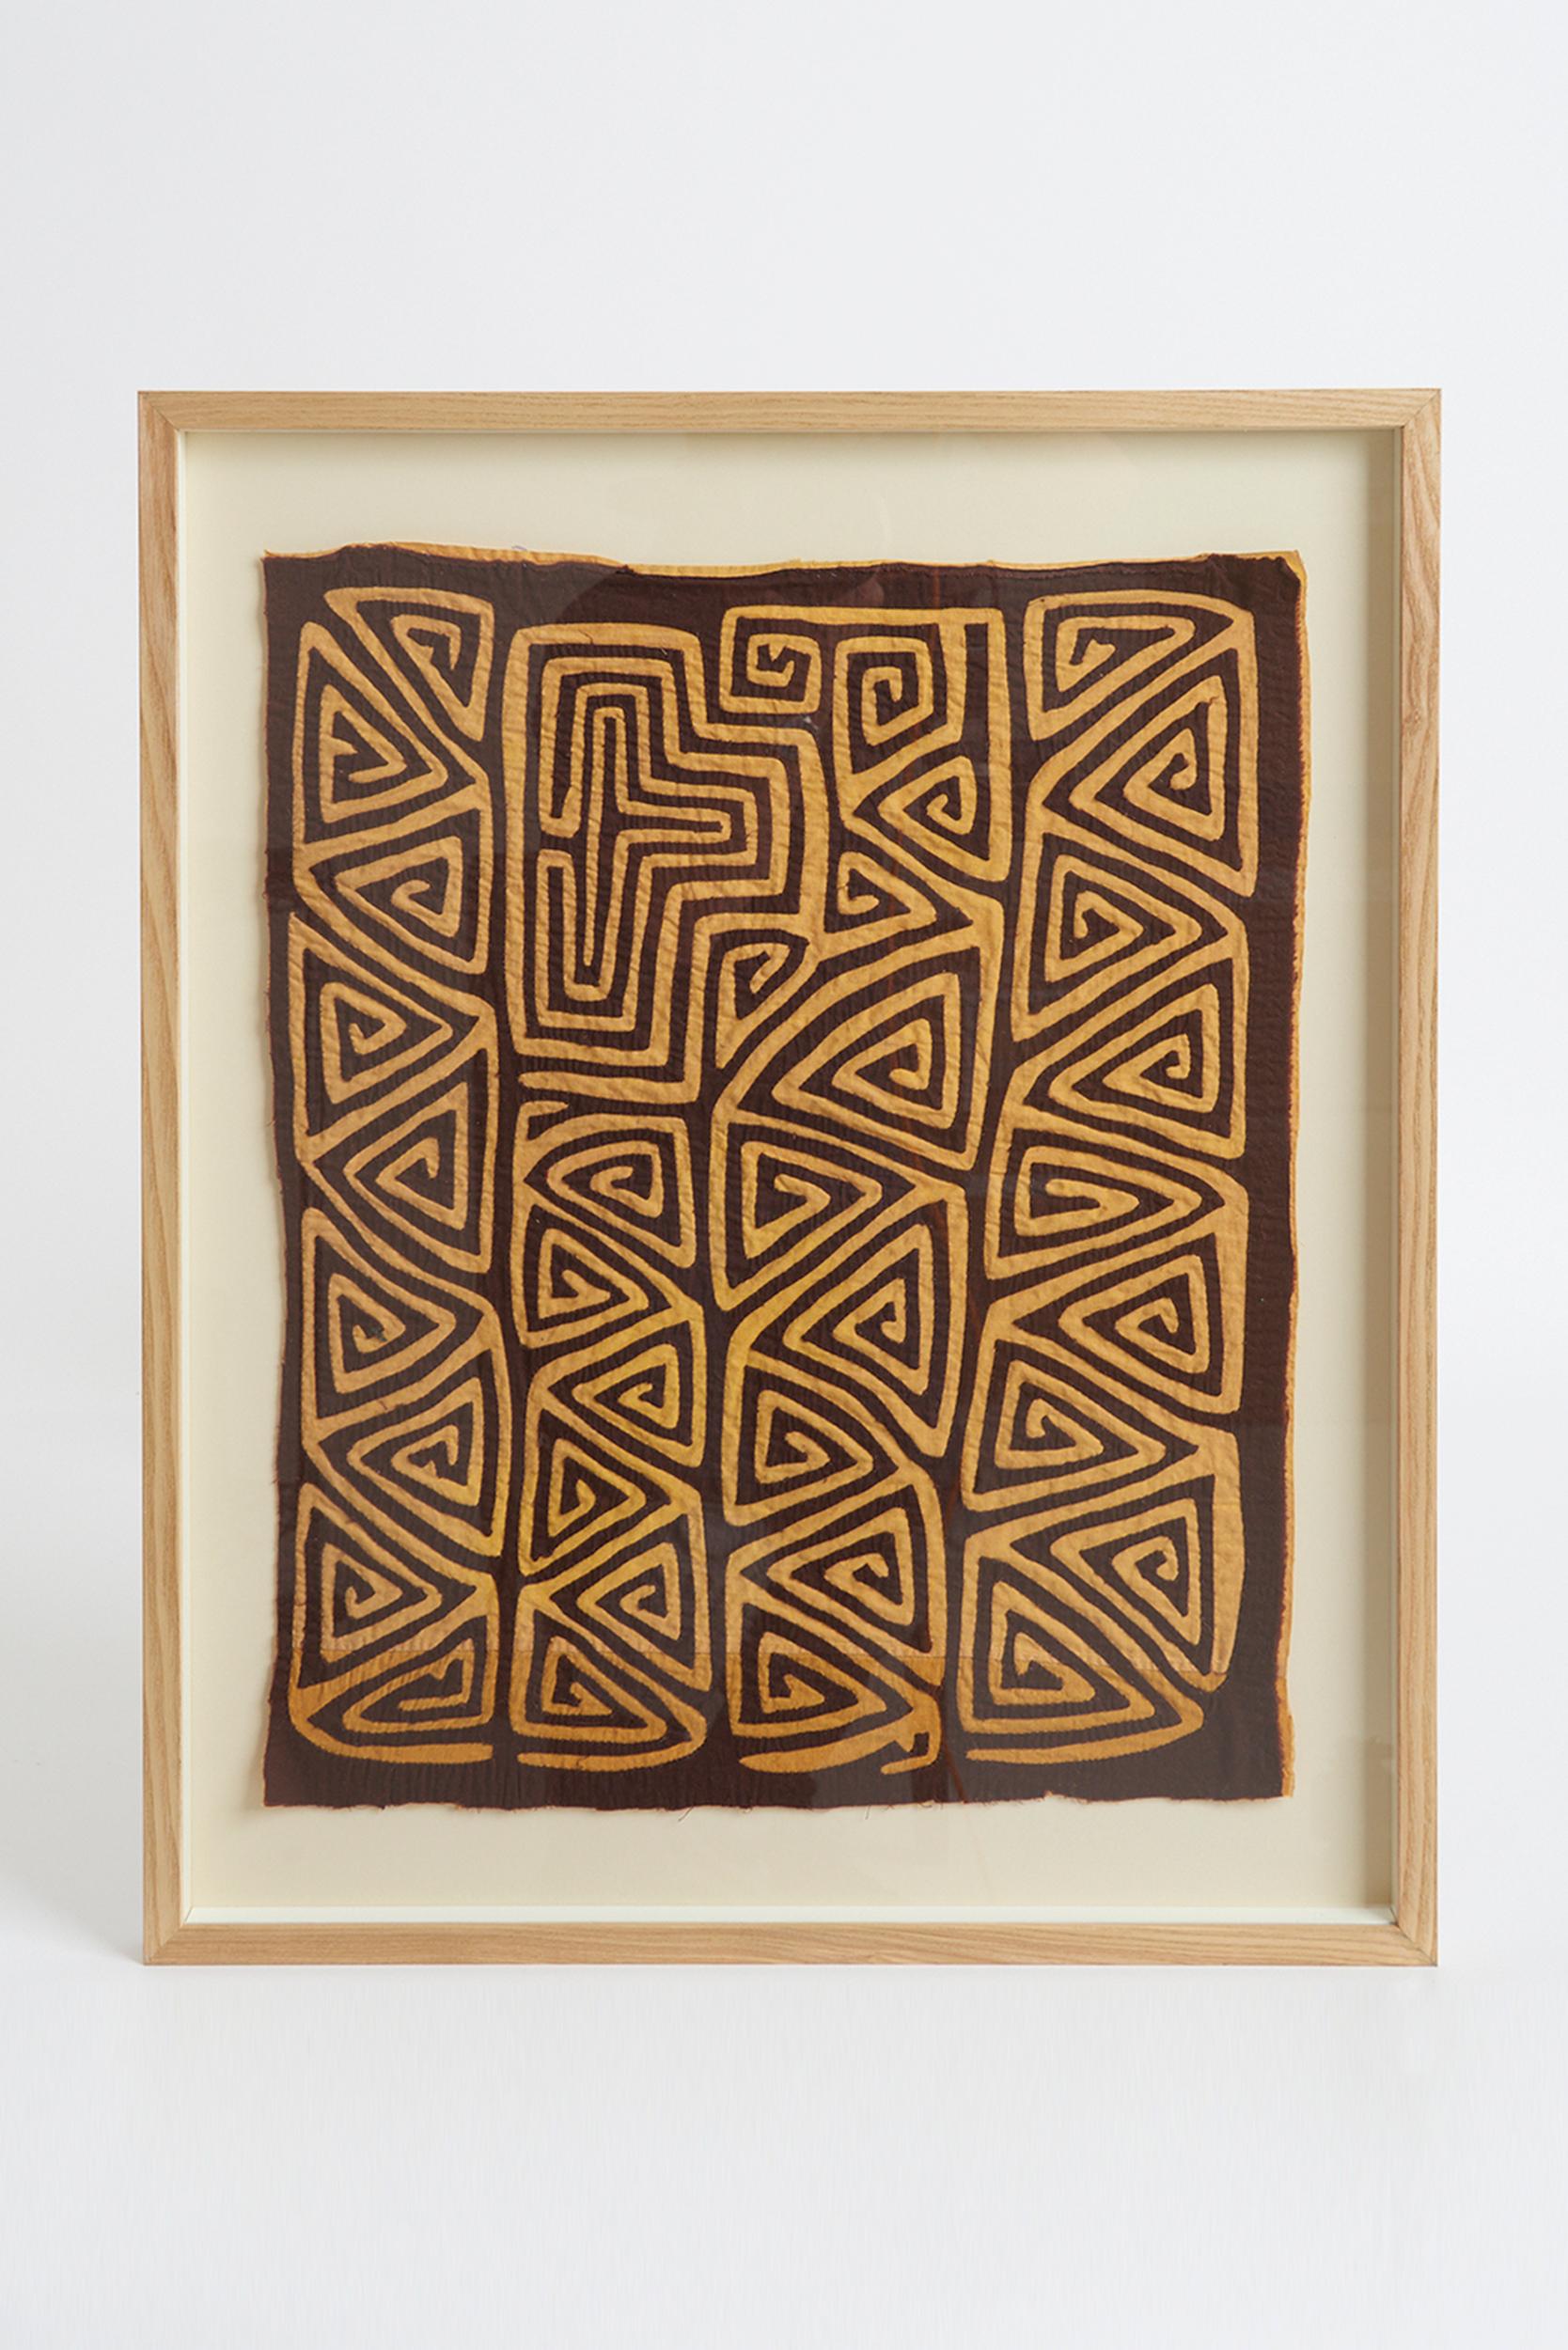 A framed Mola textile.
Traditional clothing of the indigenous Guna people from Panamá and Colombia.
South America, 1960s.
62 cm high by 50.5 cm wide by 2.5 cm depth